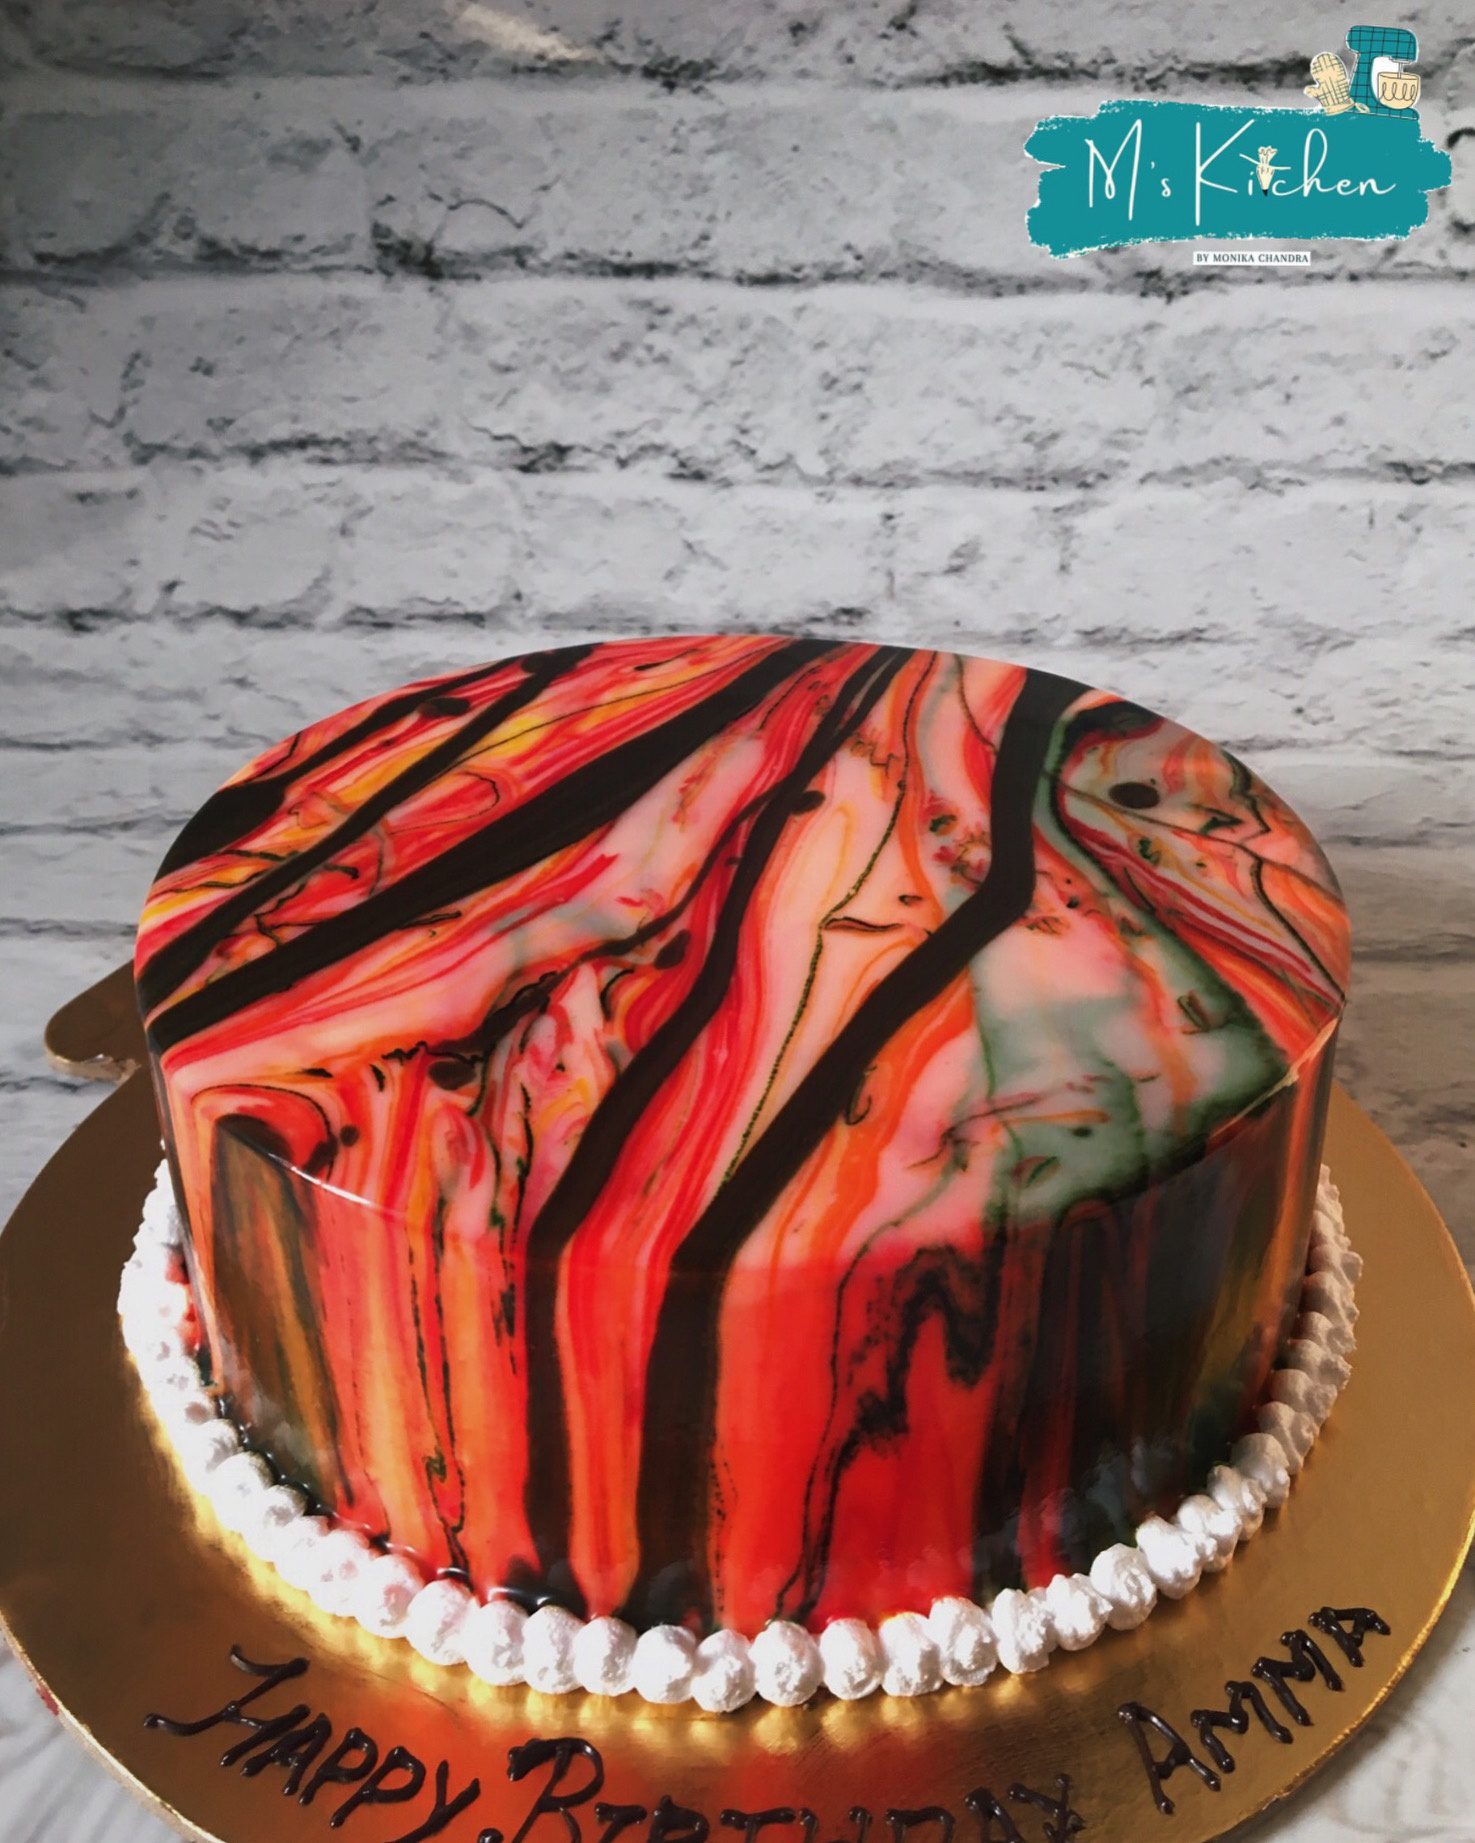 Glazed Marbled Cake Designs, Images, Price Near Me